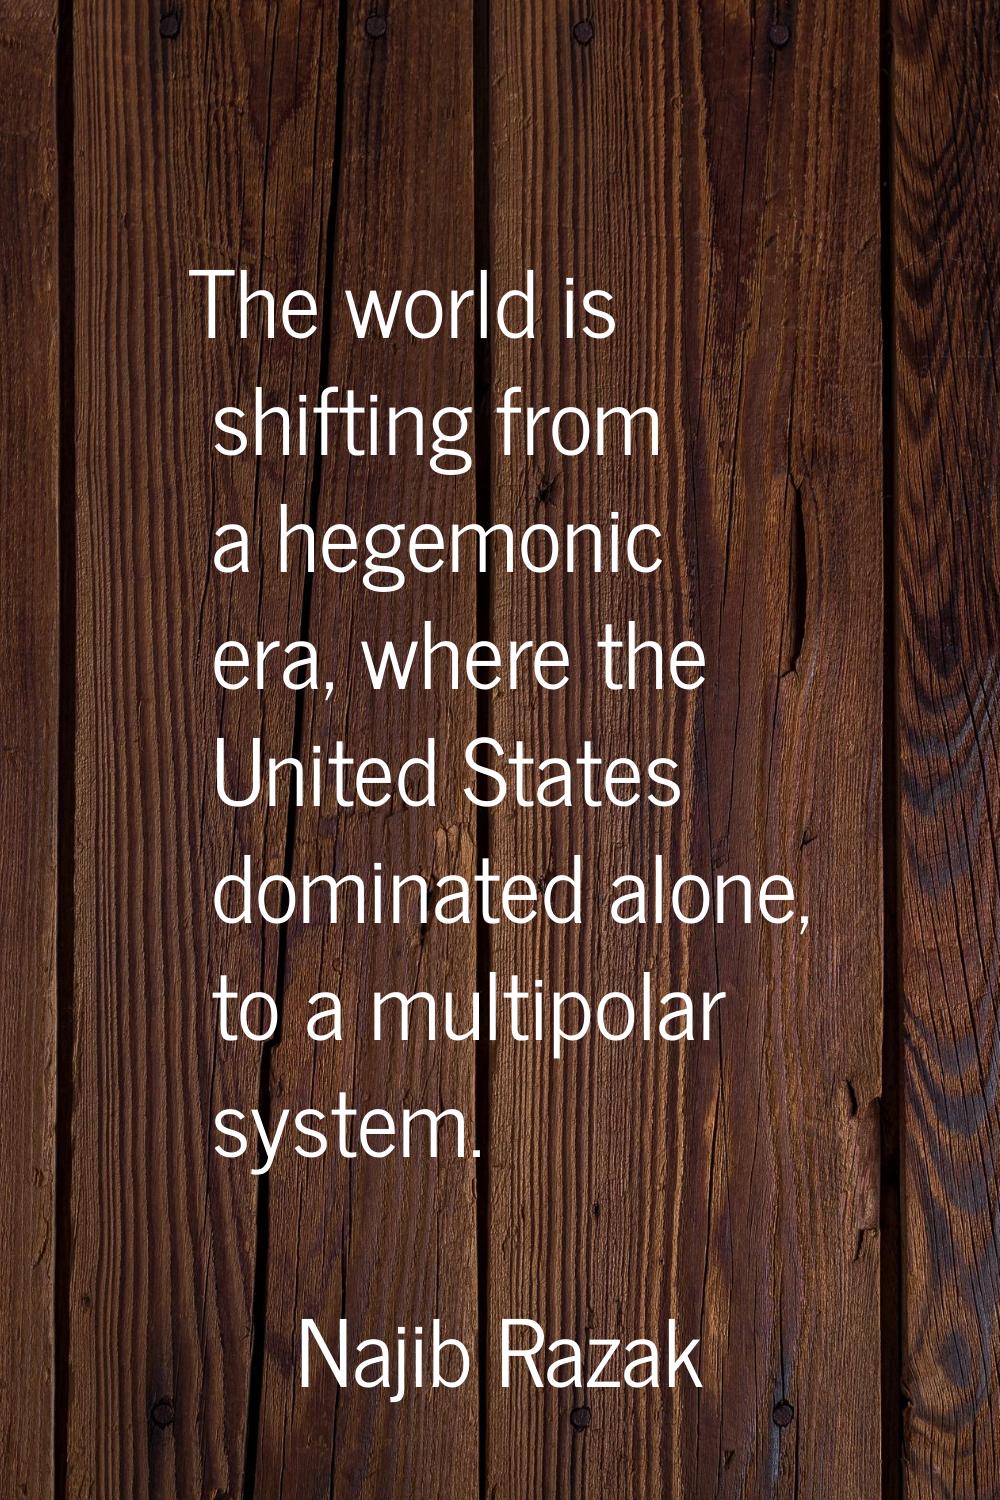 The world is shifting from a hegemonic era, where the United States dominated alone, to a multipola